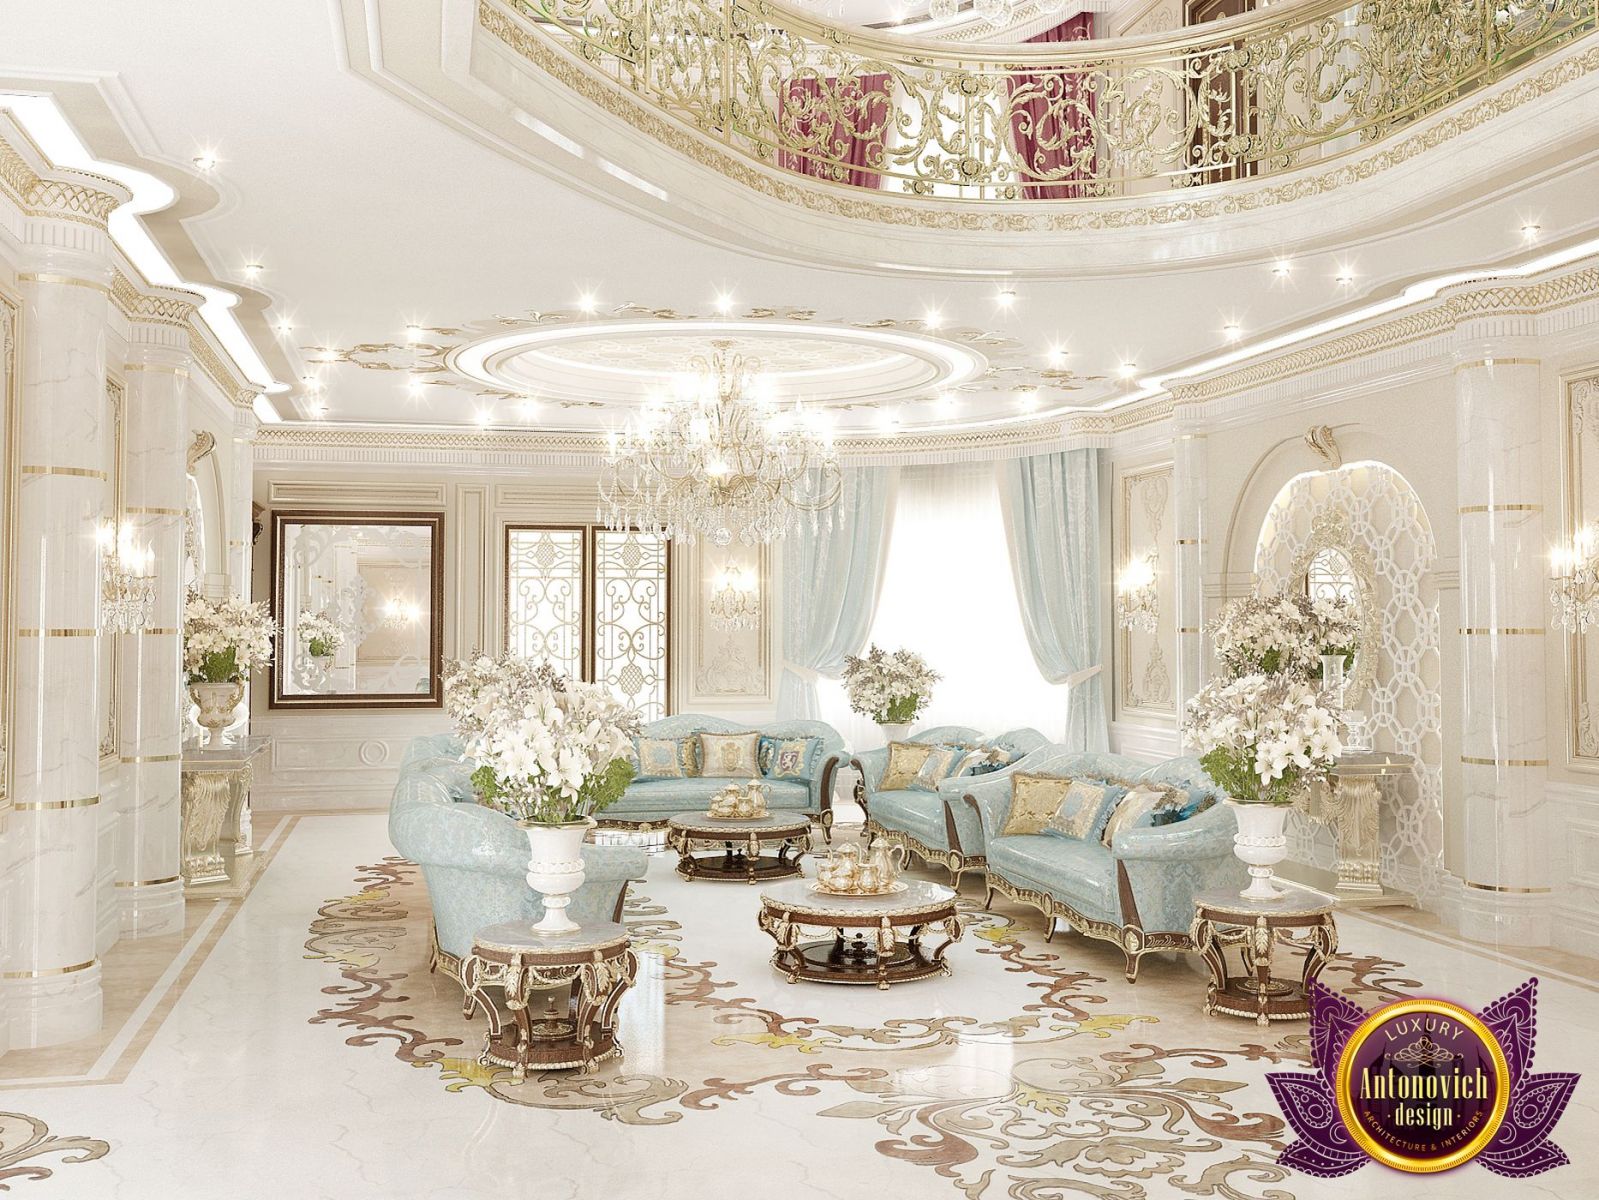 Chic restaurant interior in Sharjah by renowned designer